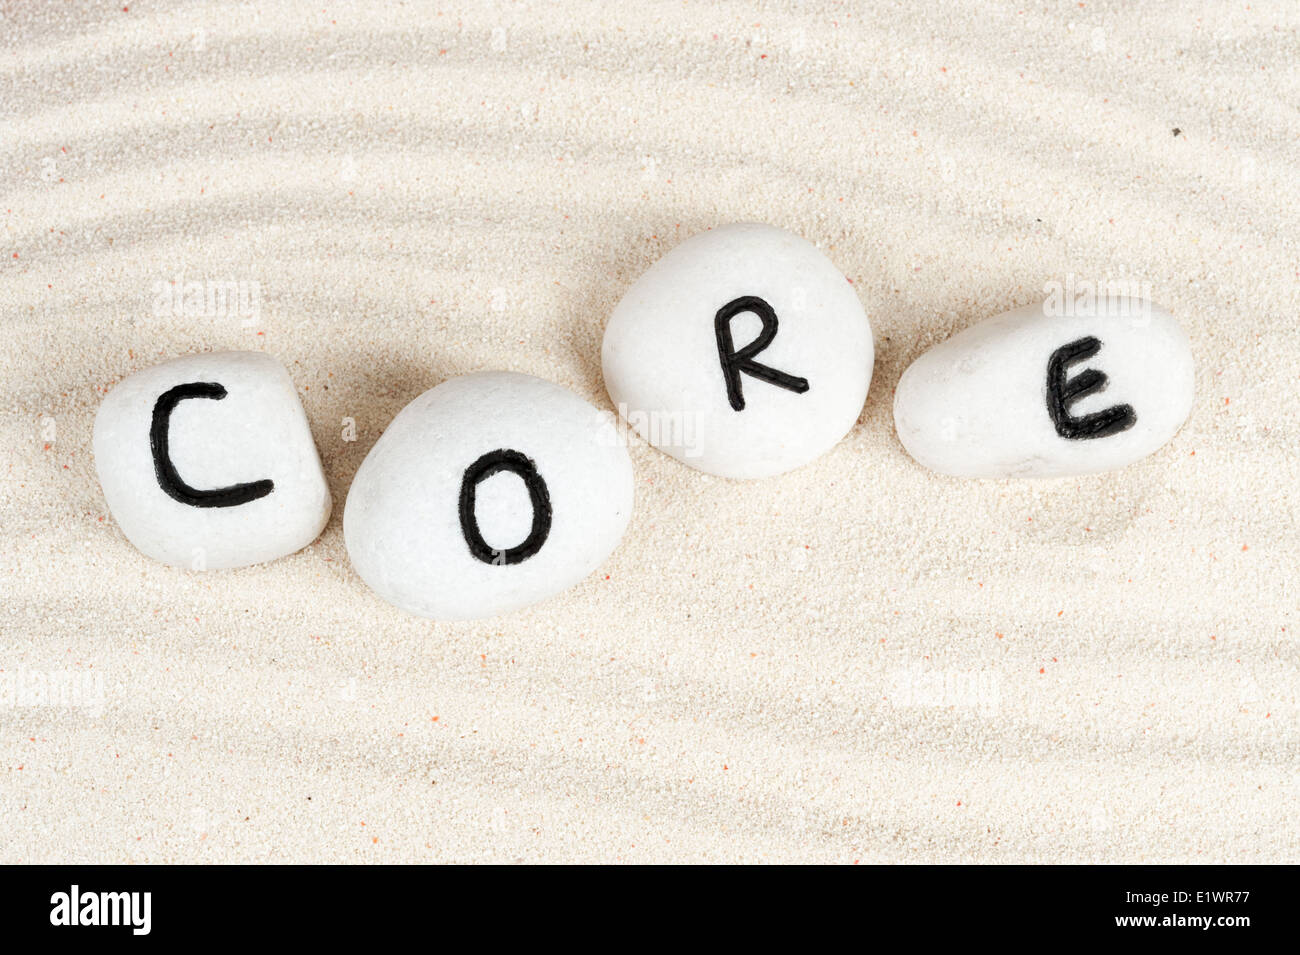 Core word on group of stones with sand as background Stock Photo